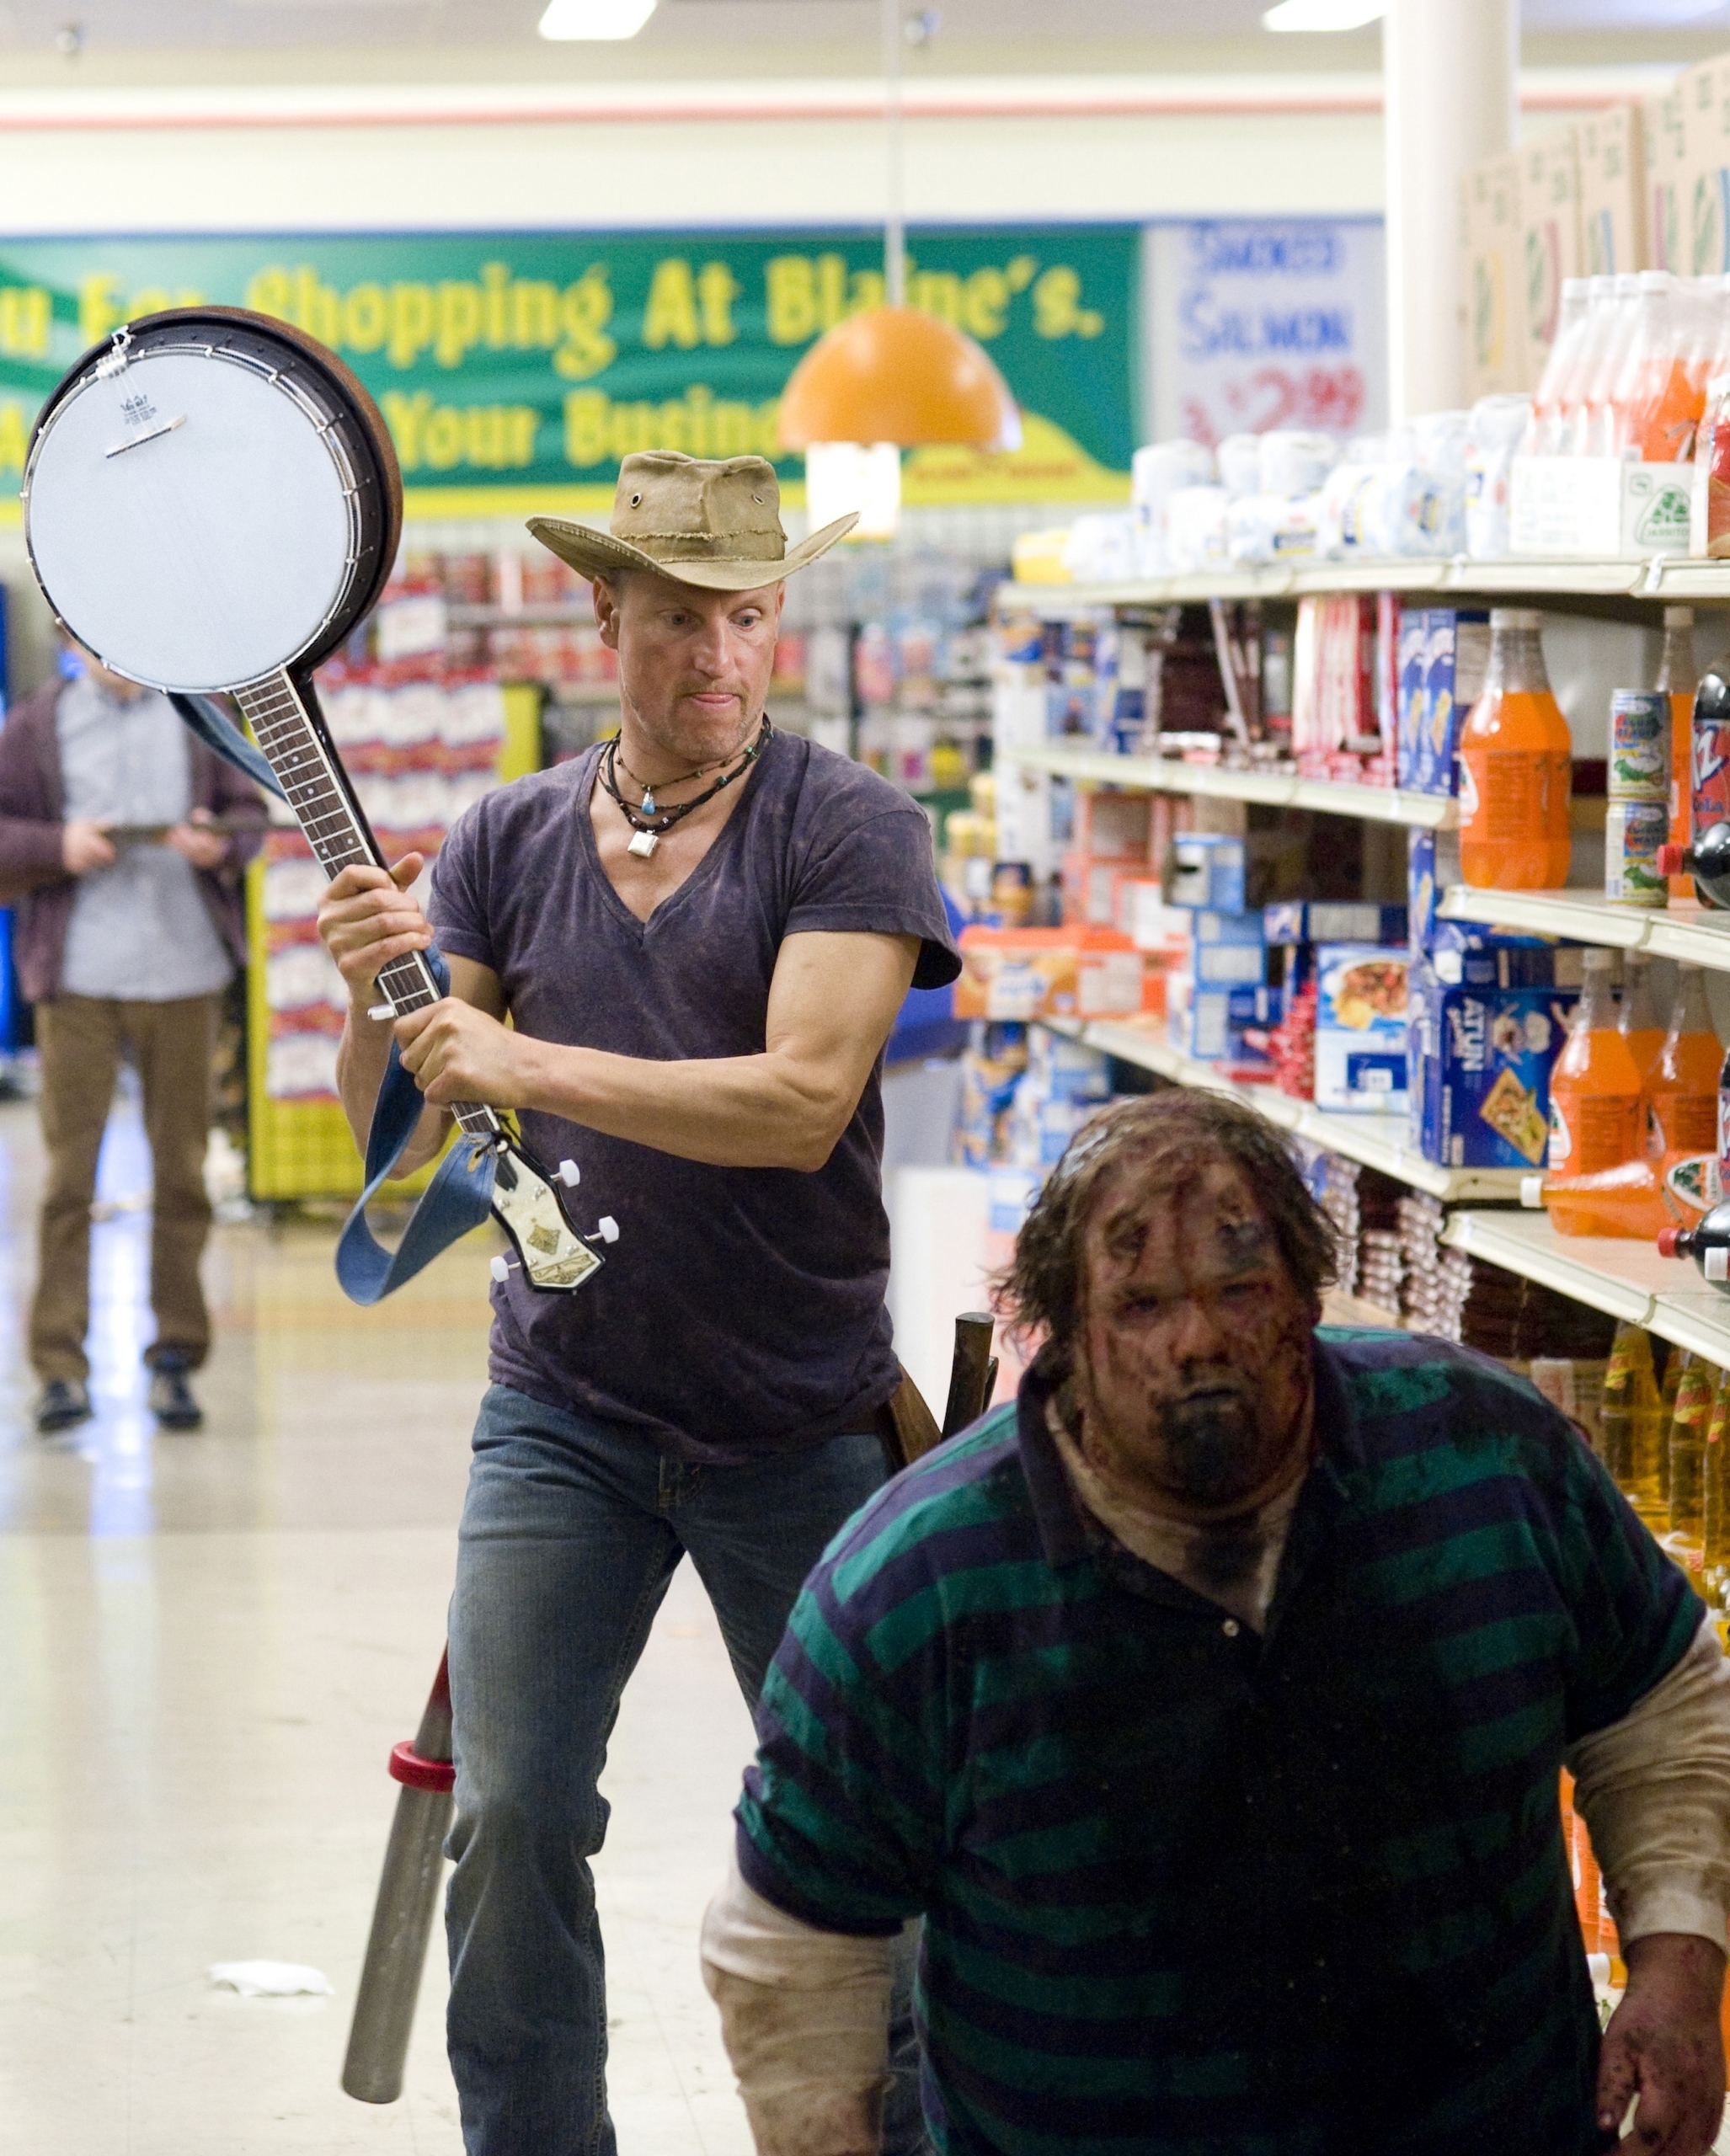 Zombieland Image Tallahassee HD Wallpaper And Background Photos